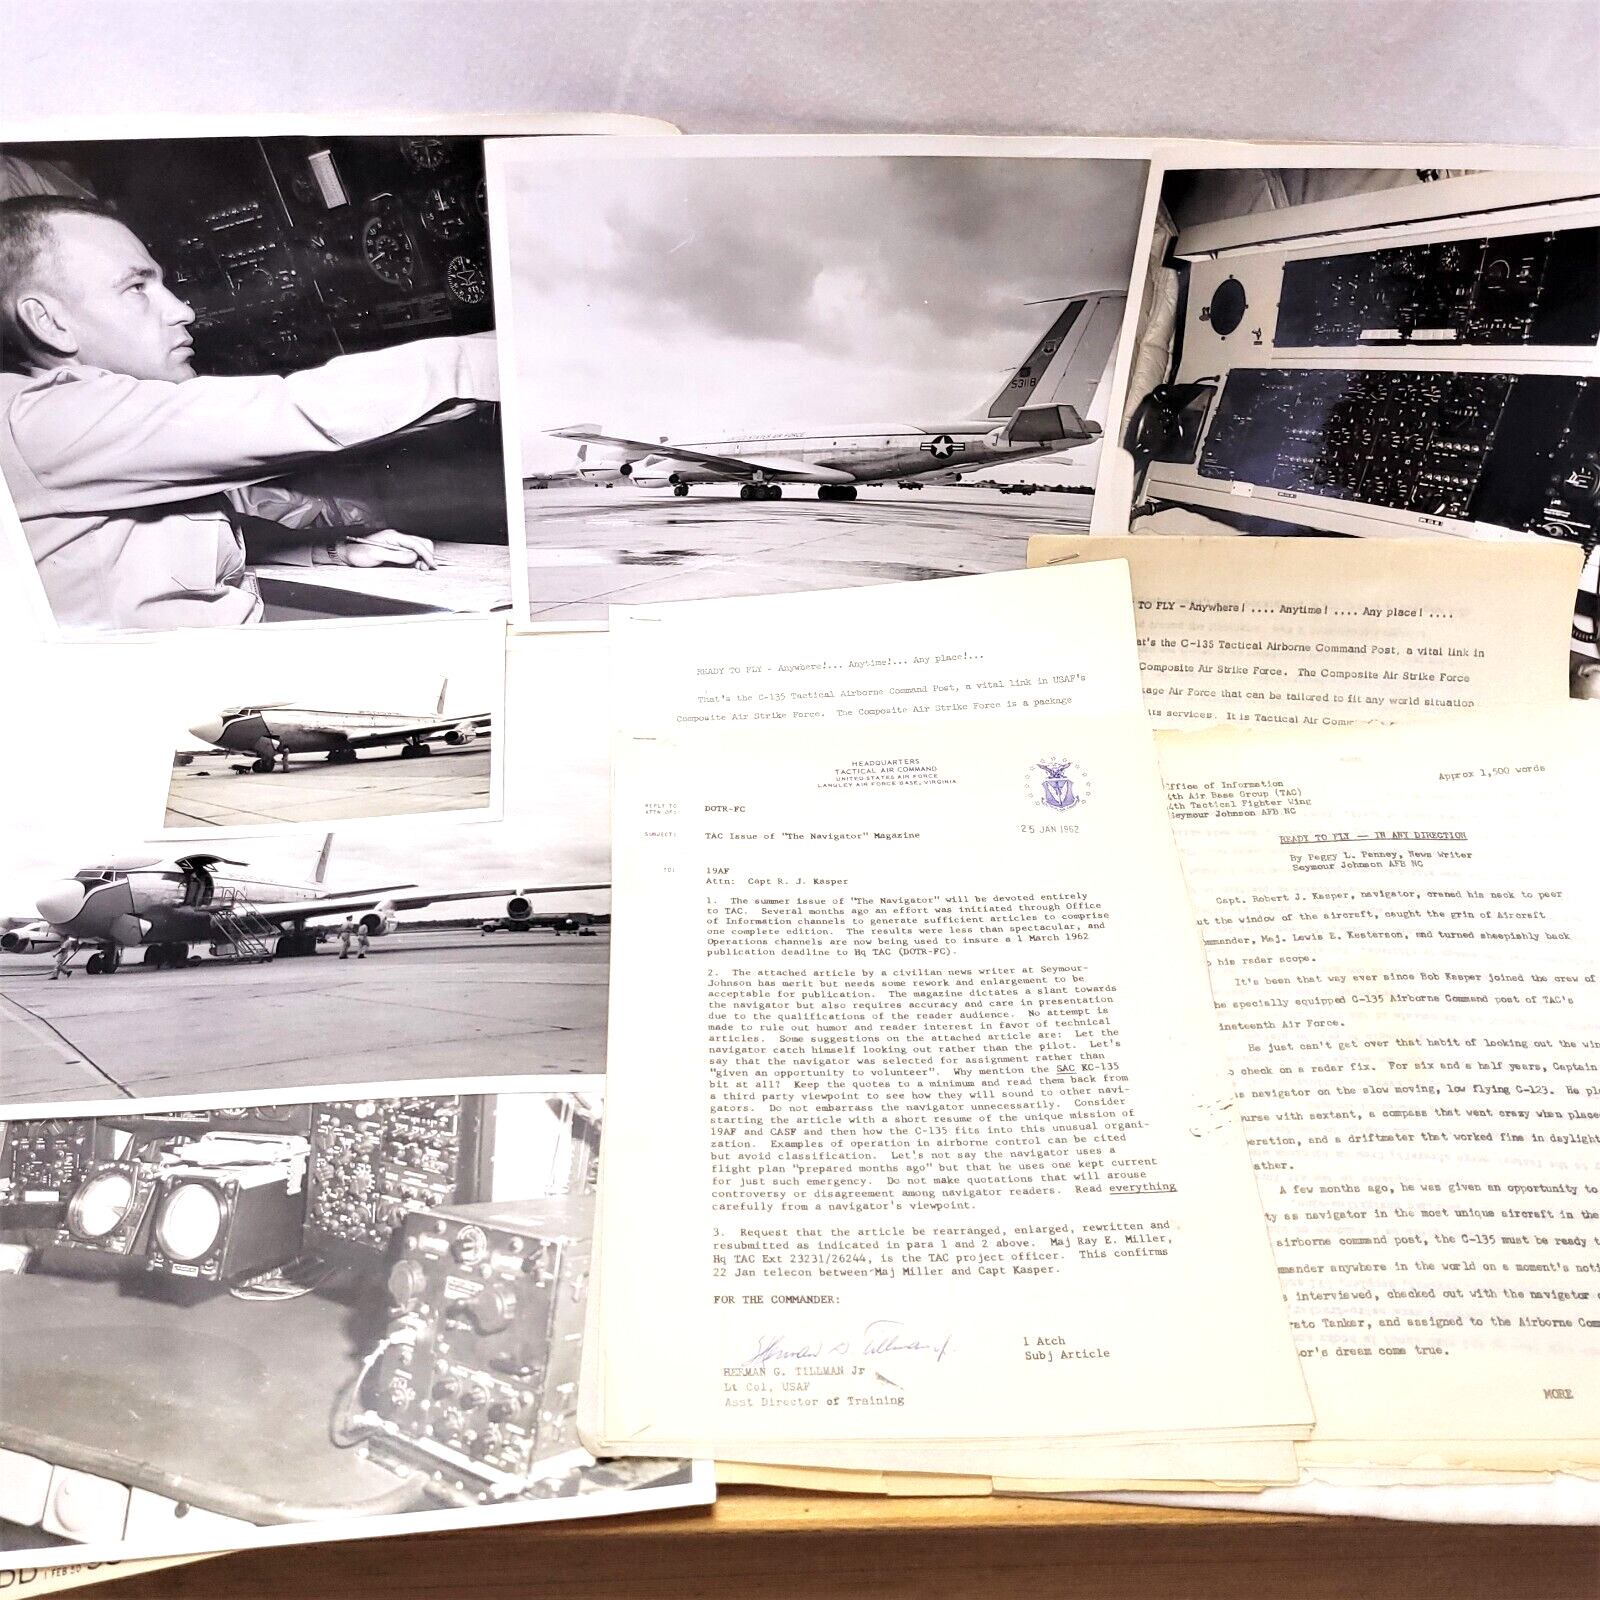 1961 USAF C-135 LOOKING GLASS AIRBONE COMMAND POST NAVIGATOR FILE PHOTOS ARTICLE